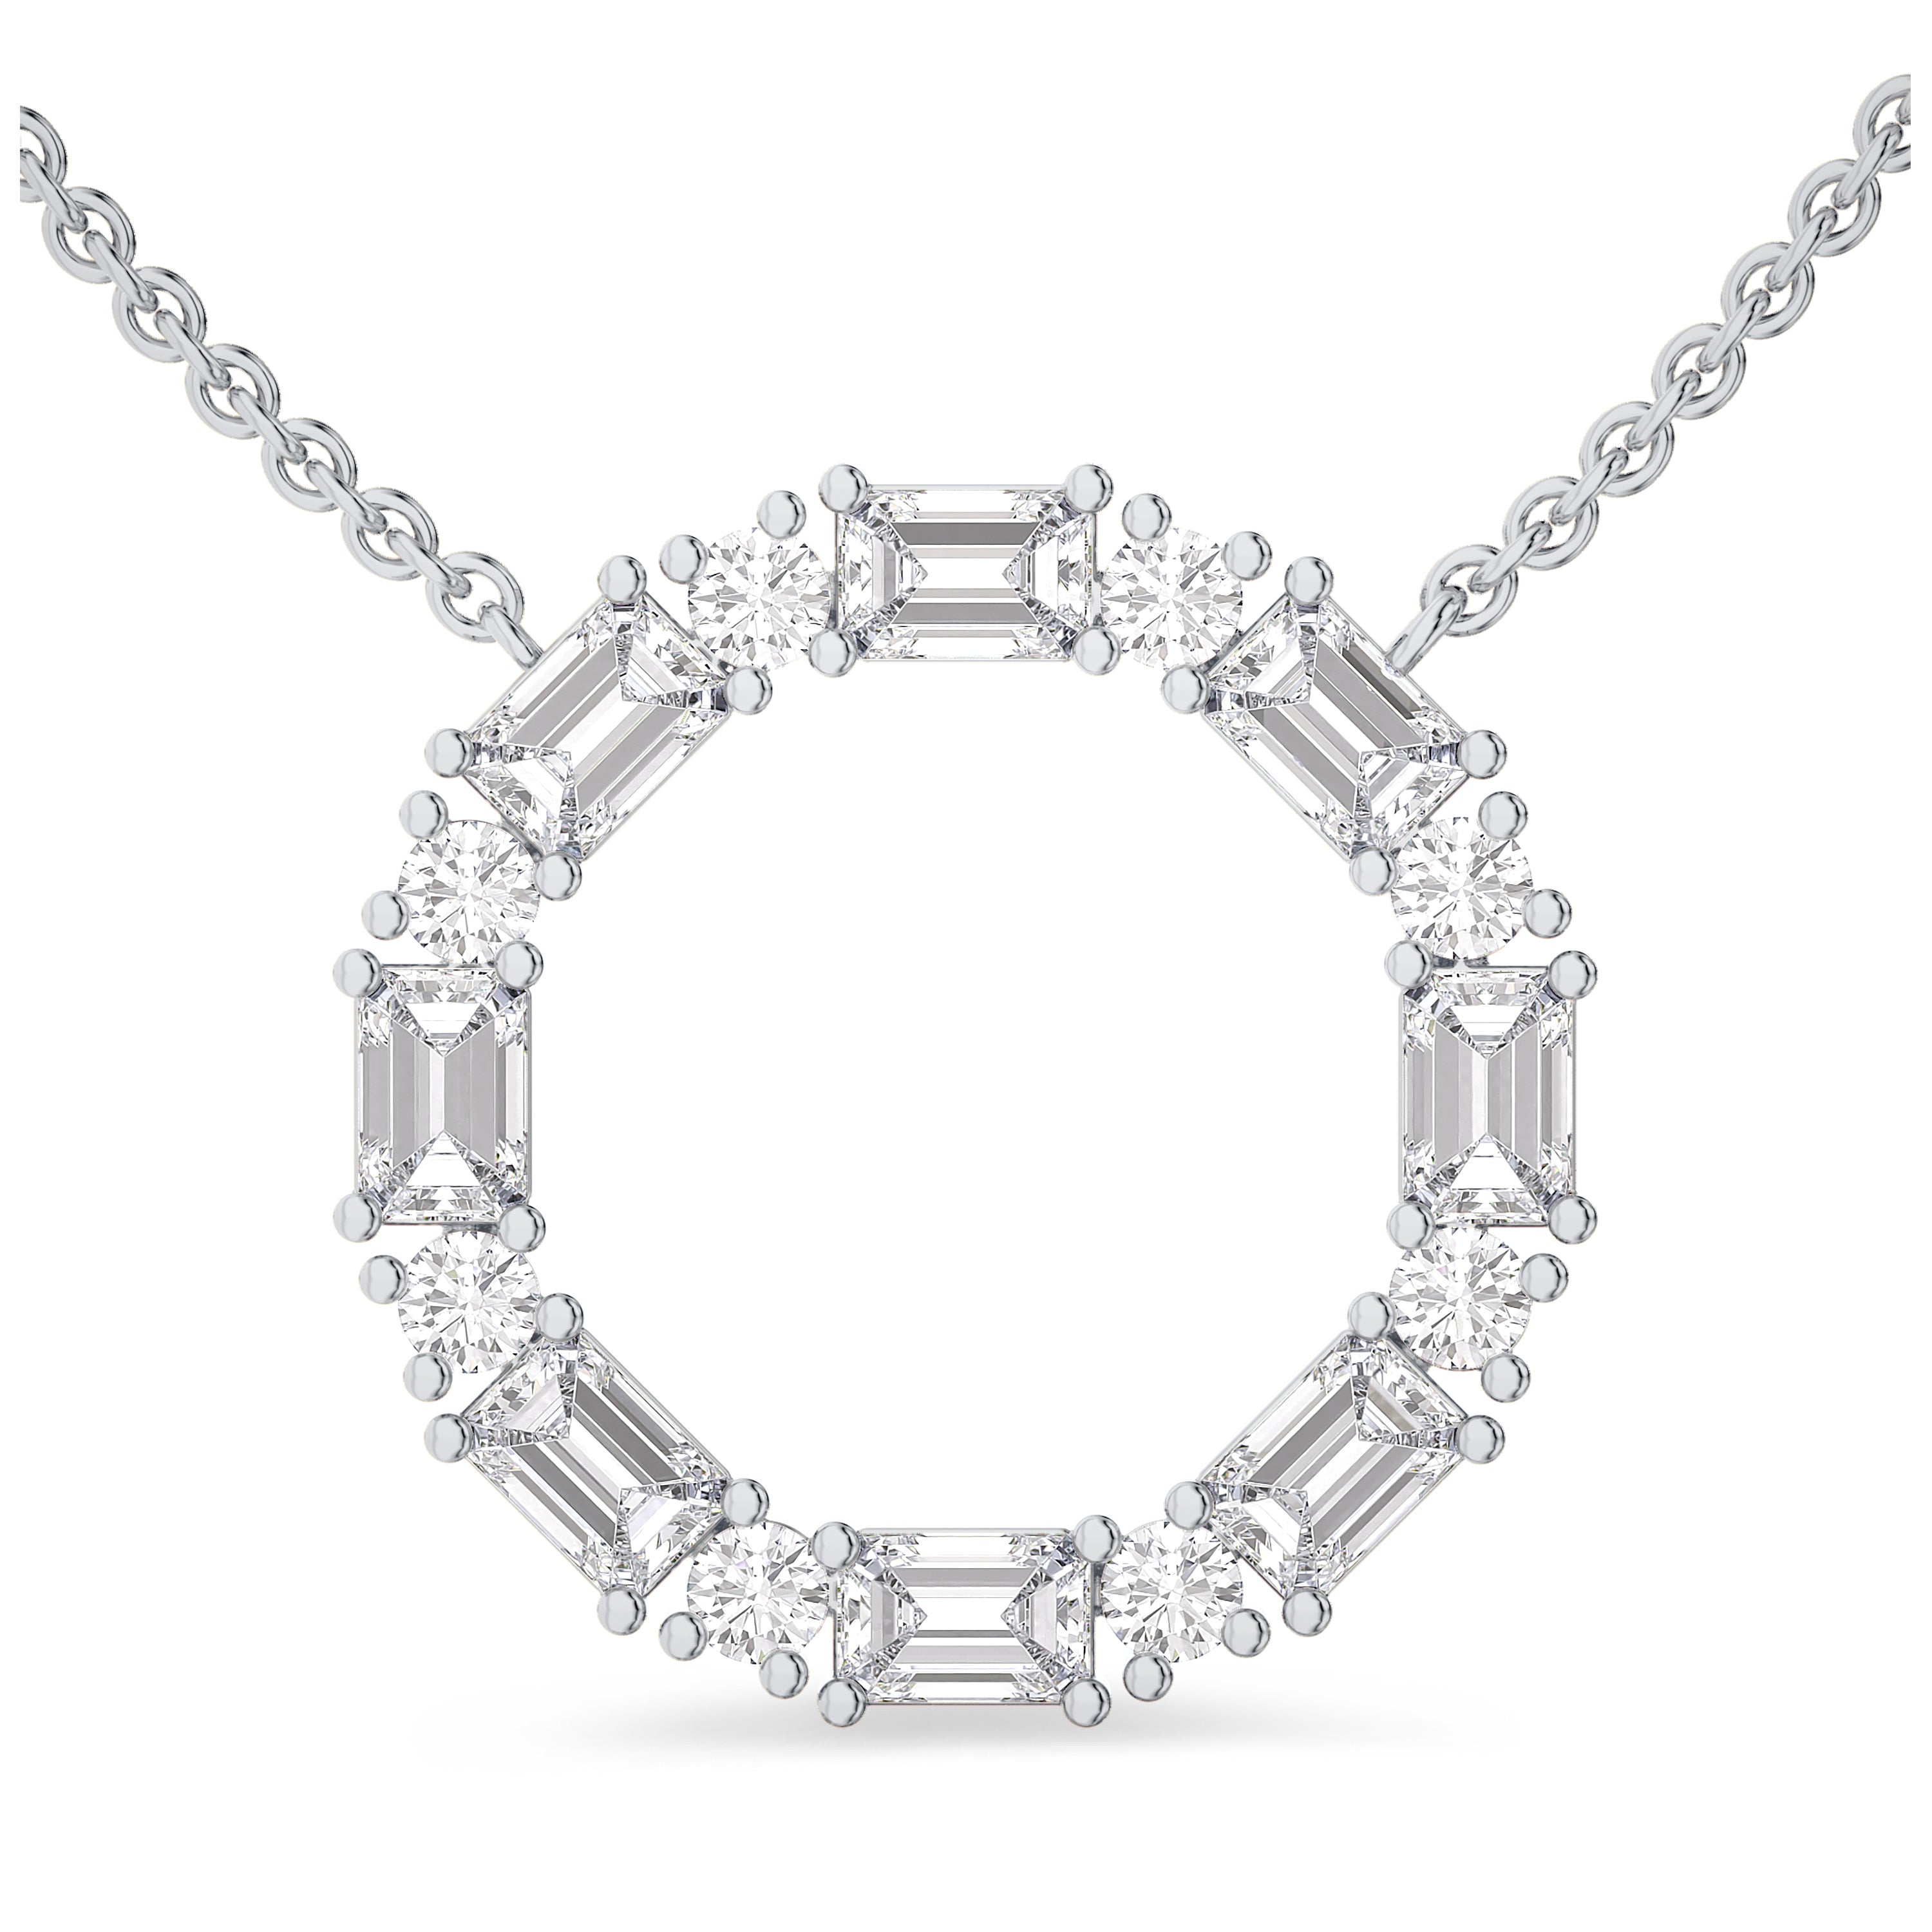 orbit diamond necklace in 0.97 carats, 18K white gold, FG color and VS-SI clarity